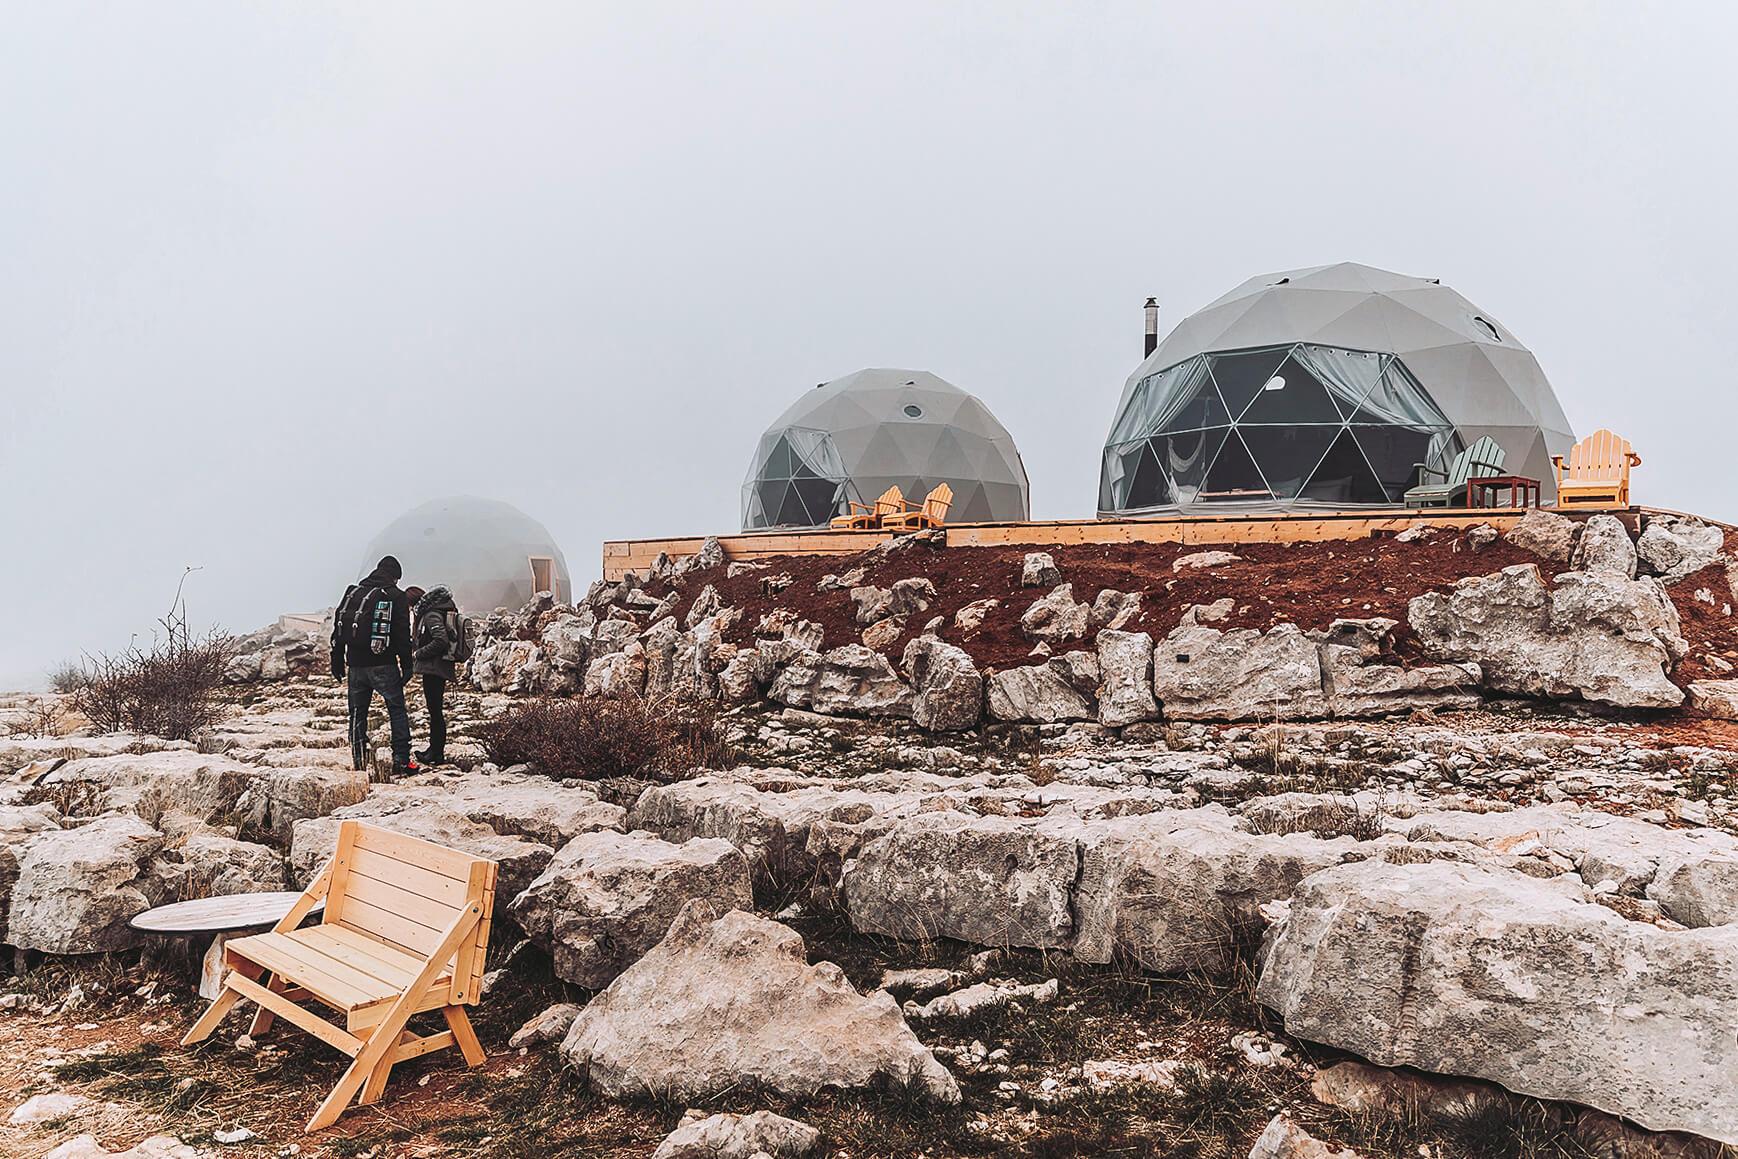 a woman and a man against a background of white geodesic domes located on rocks